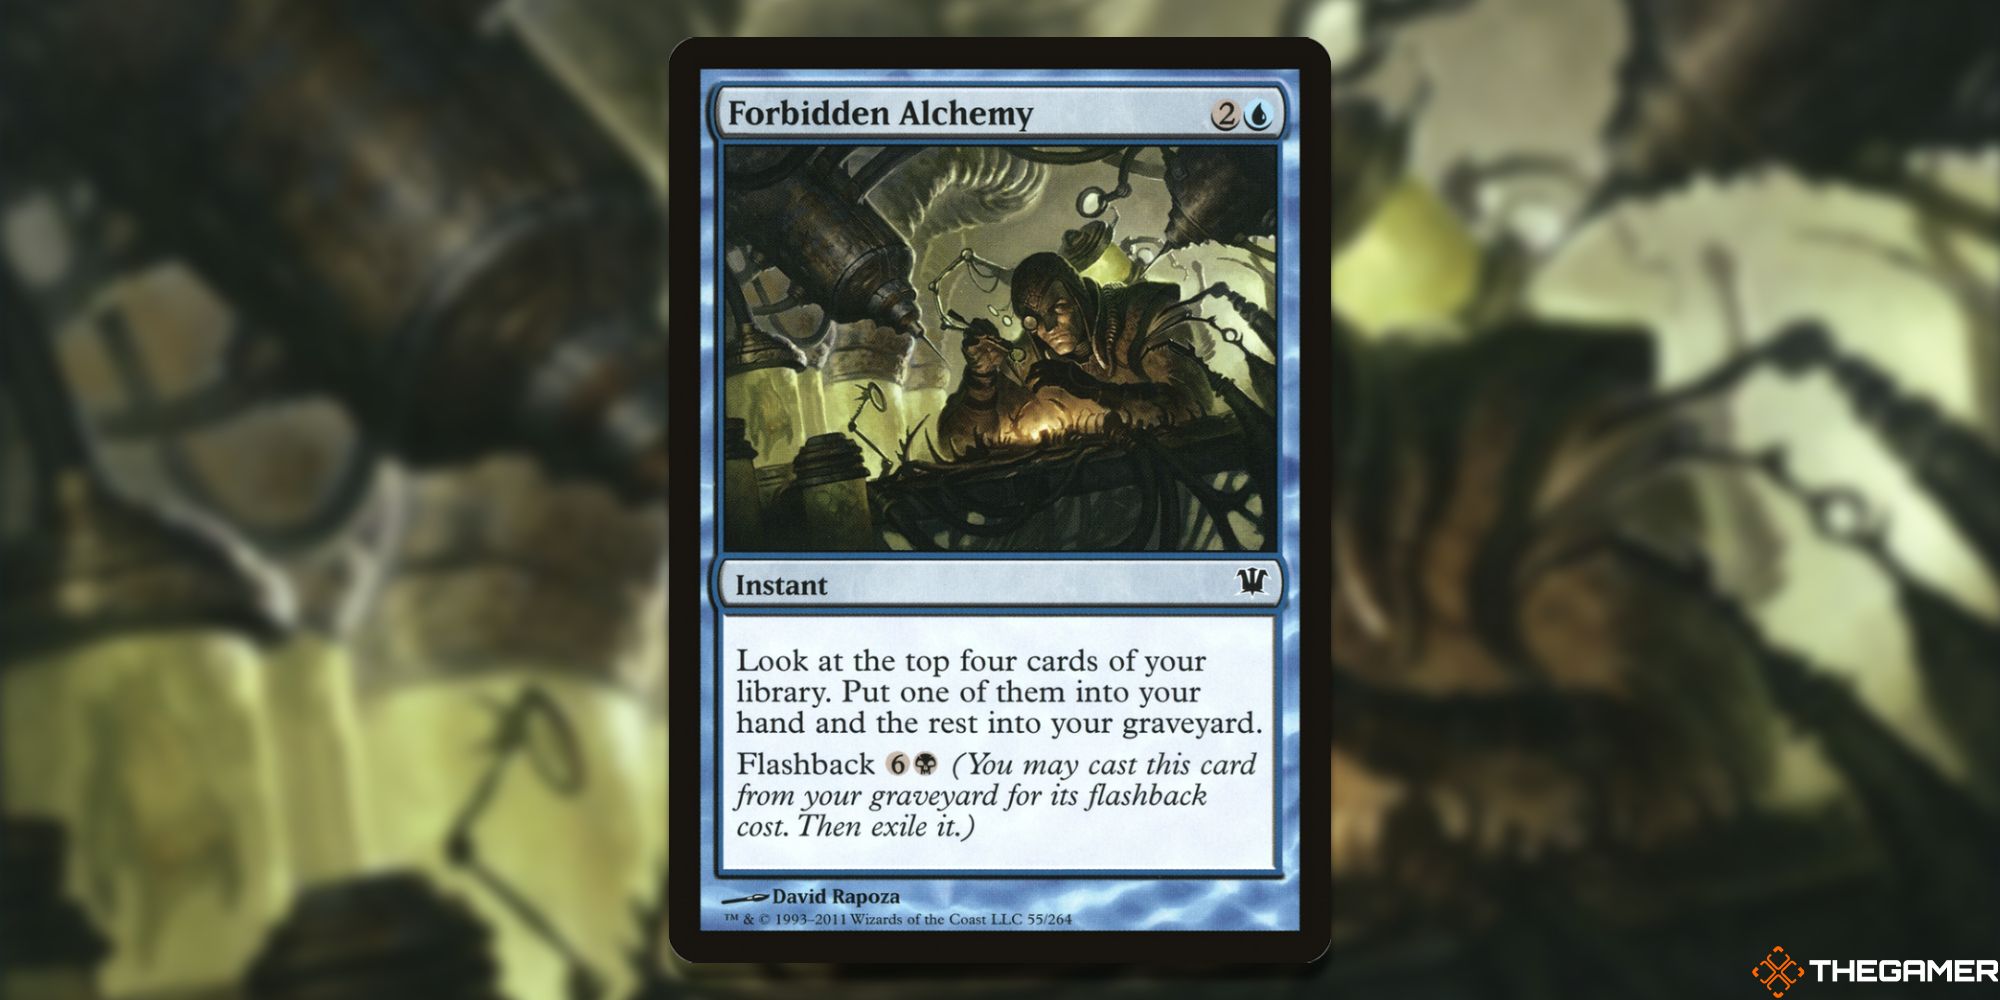 Image of the Forbidden Alchemy card in Magic: The Gathering, with art by David Rapoza